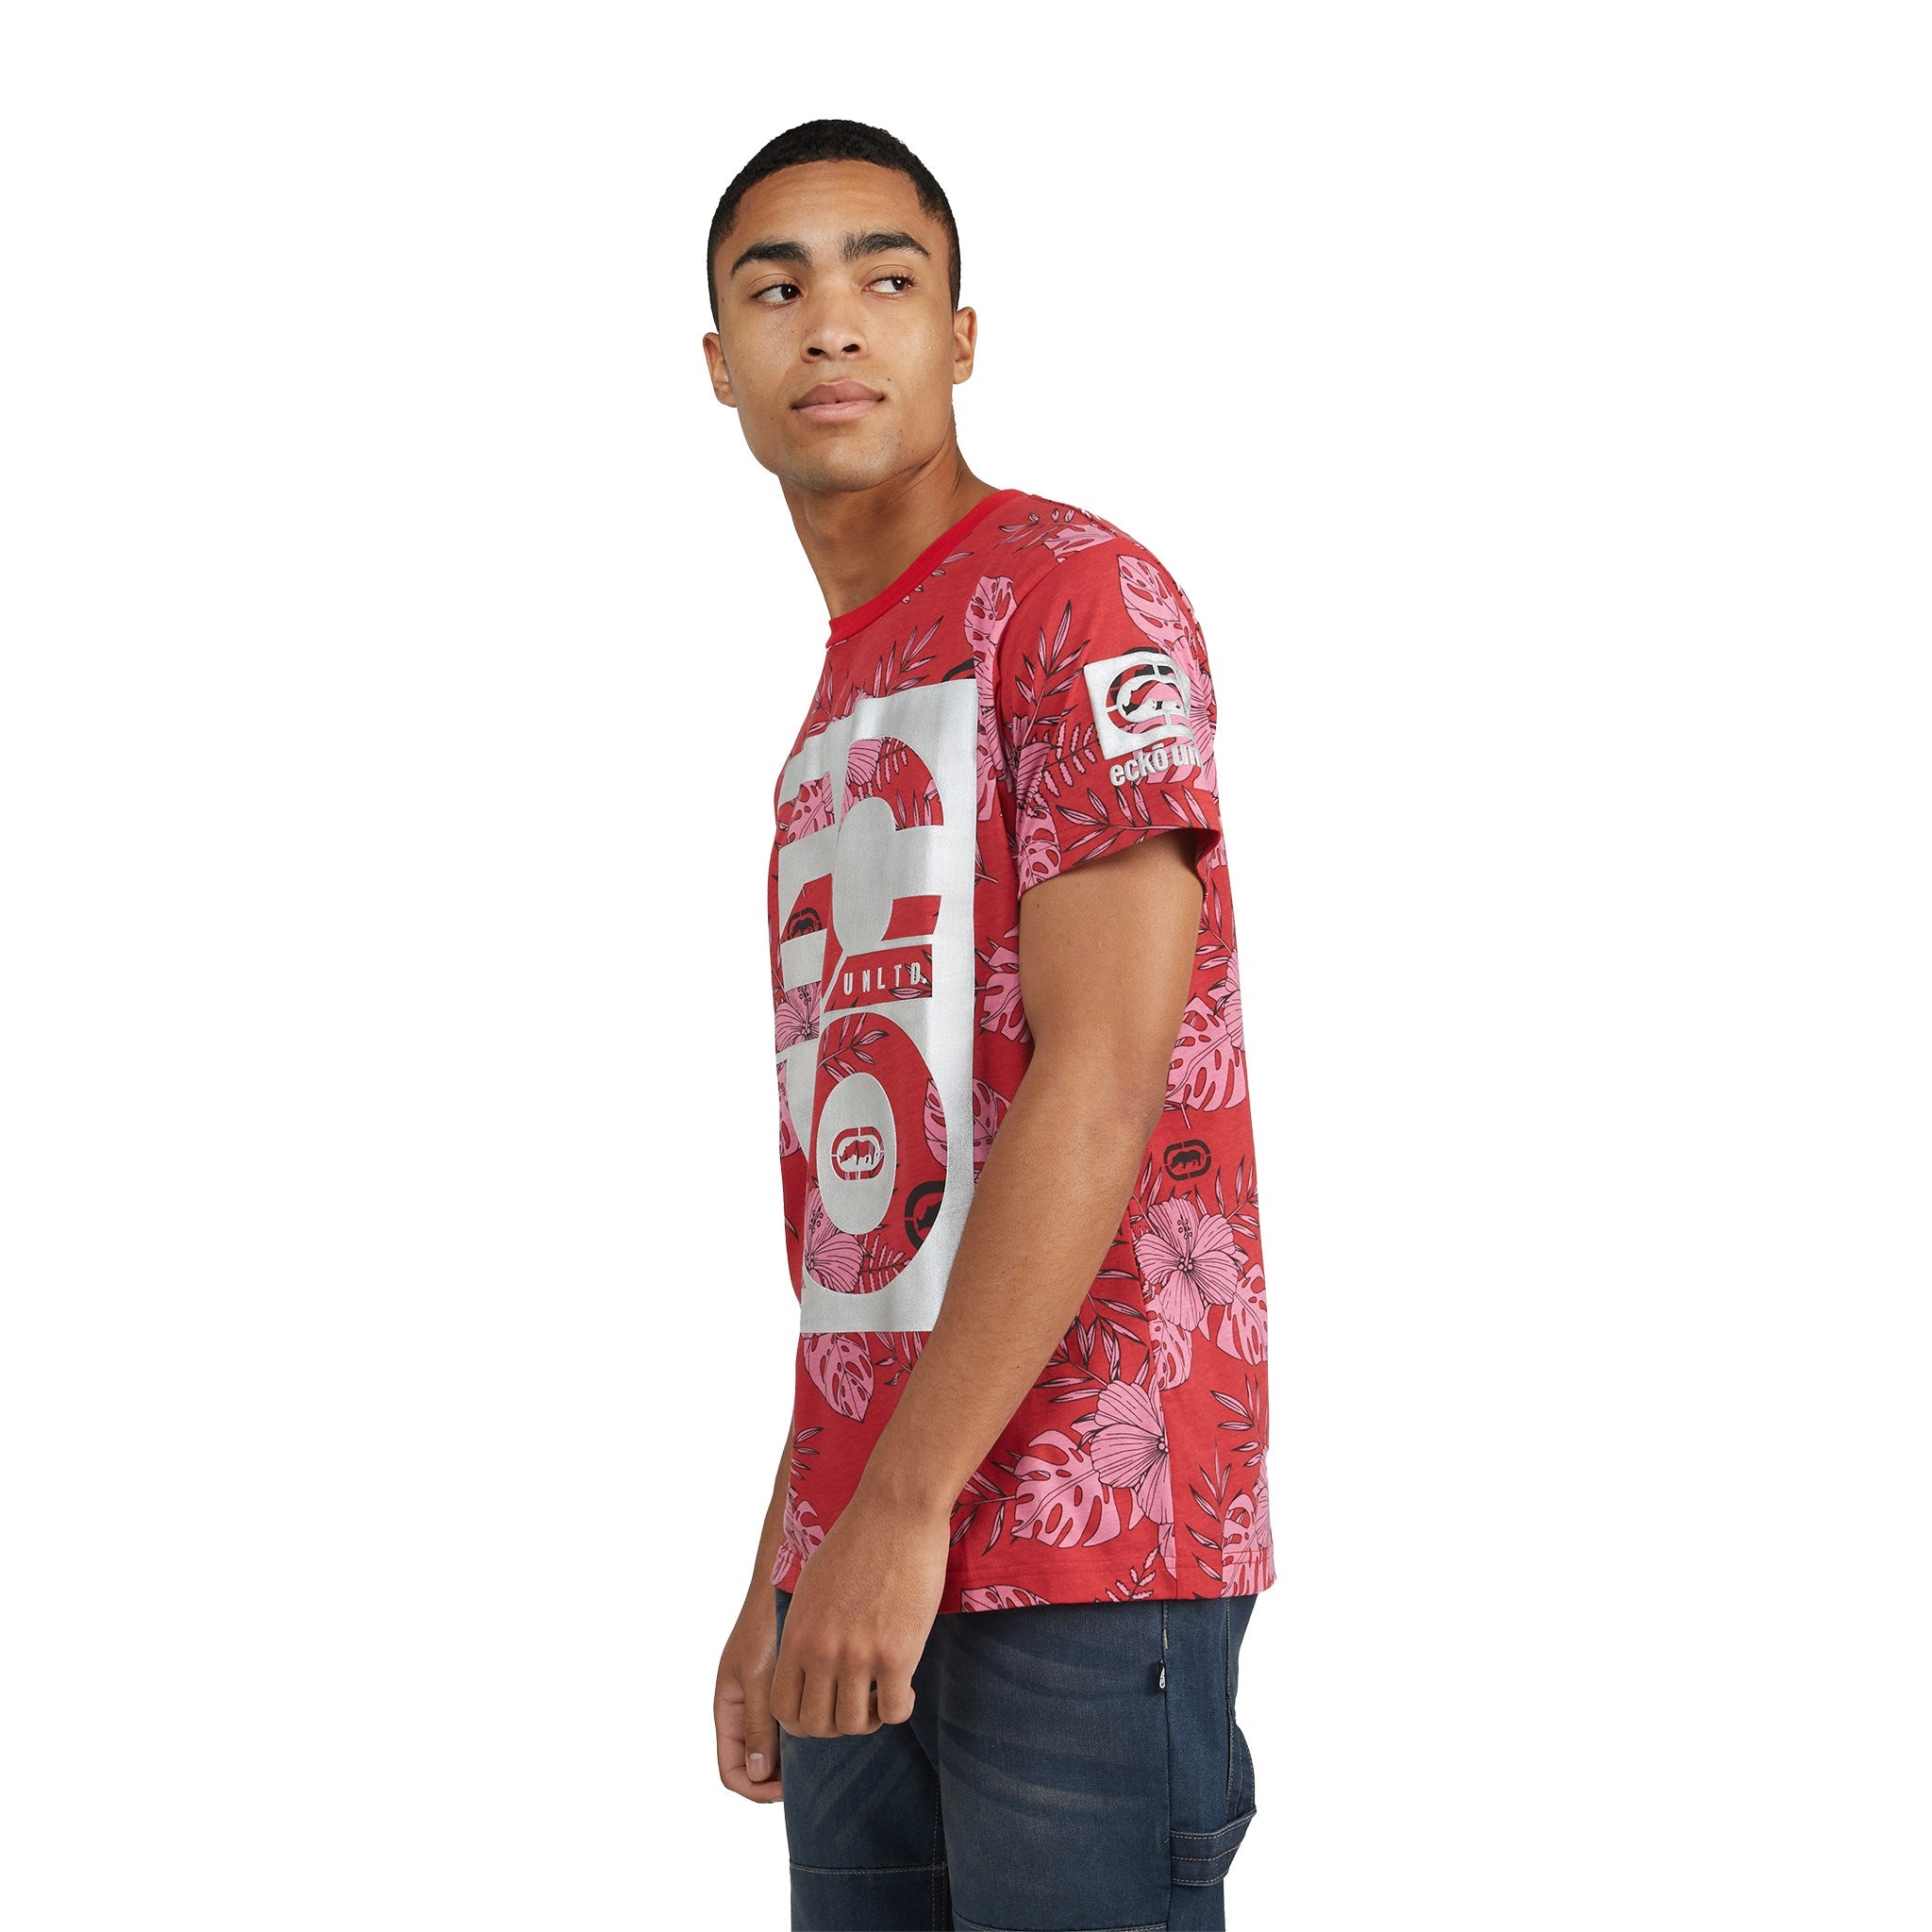 Floral Forest AOP Graphic Tee